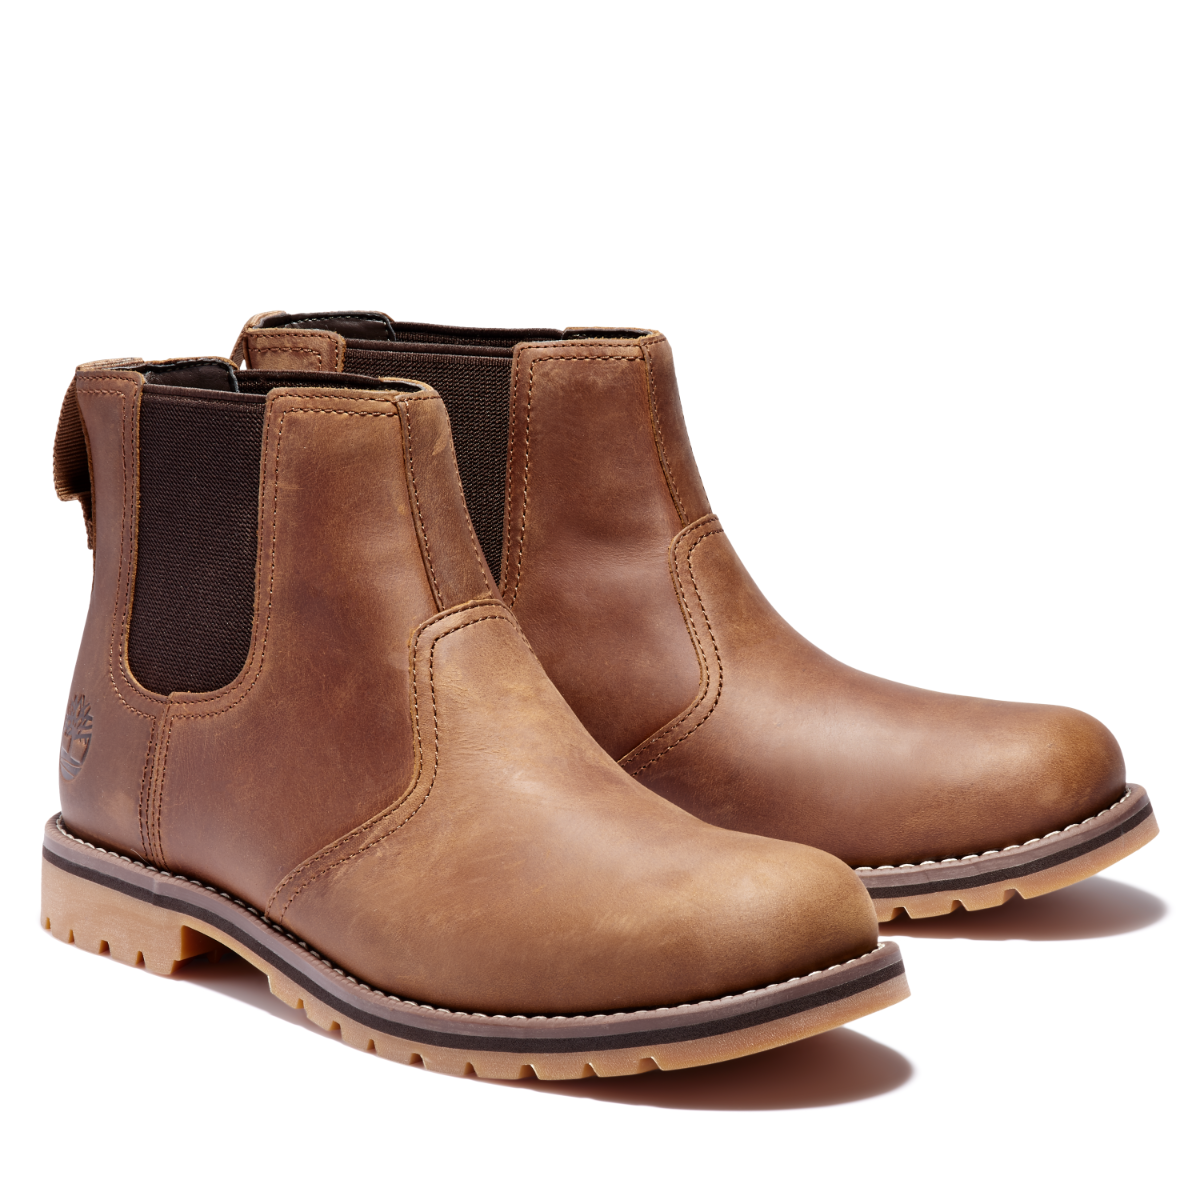 Timberland Larchmont Chelsea Men's Boots | Rust Full Grain (Model TB 0A2NGYF13)